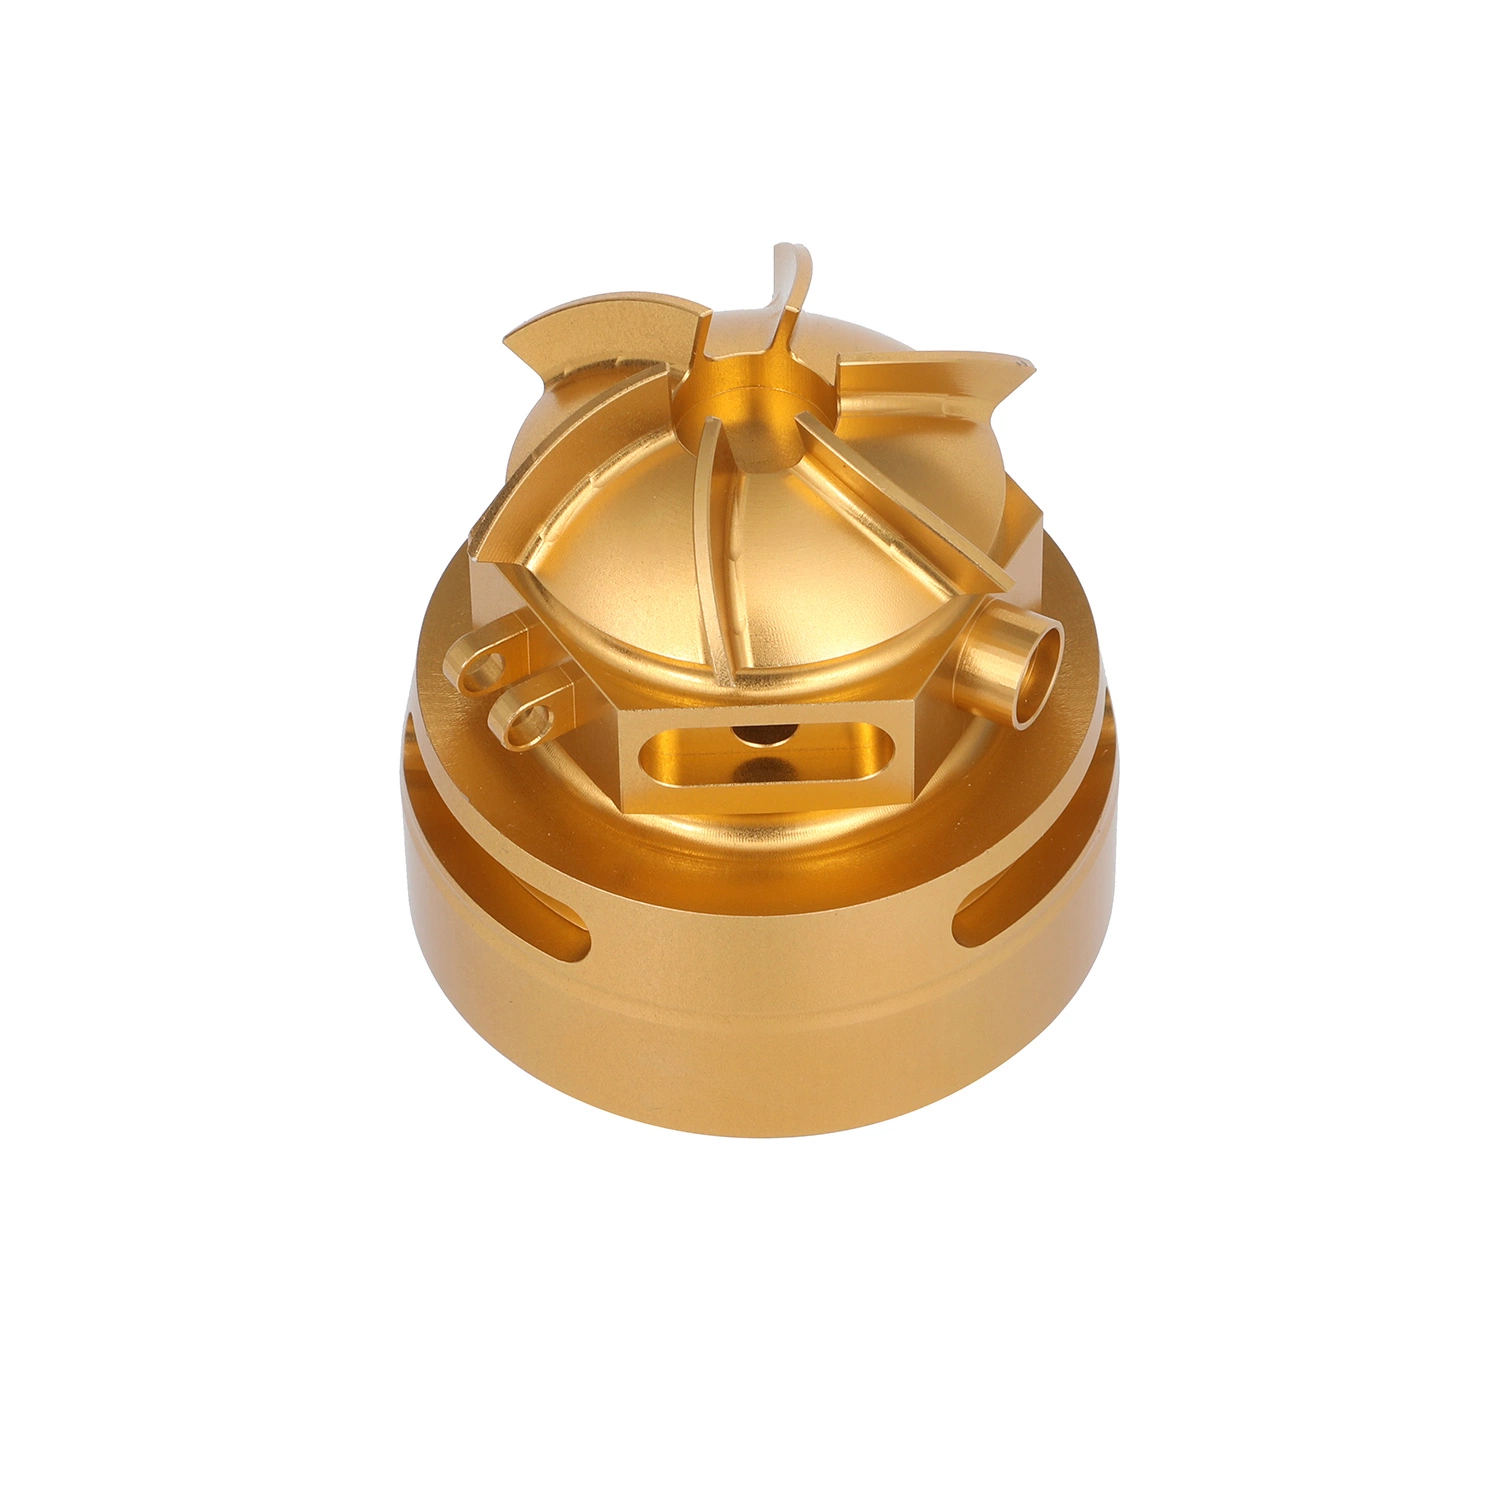 Custom Precision Brass and Copper Metal Parts Turning Milling CNC Machining Parts